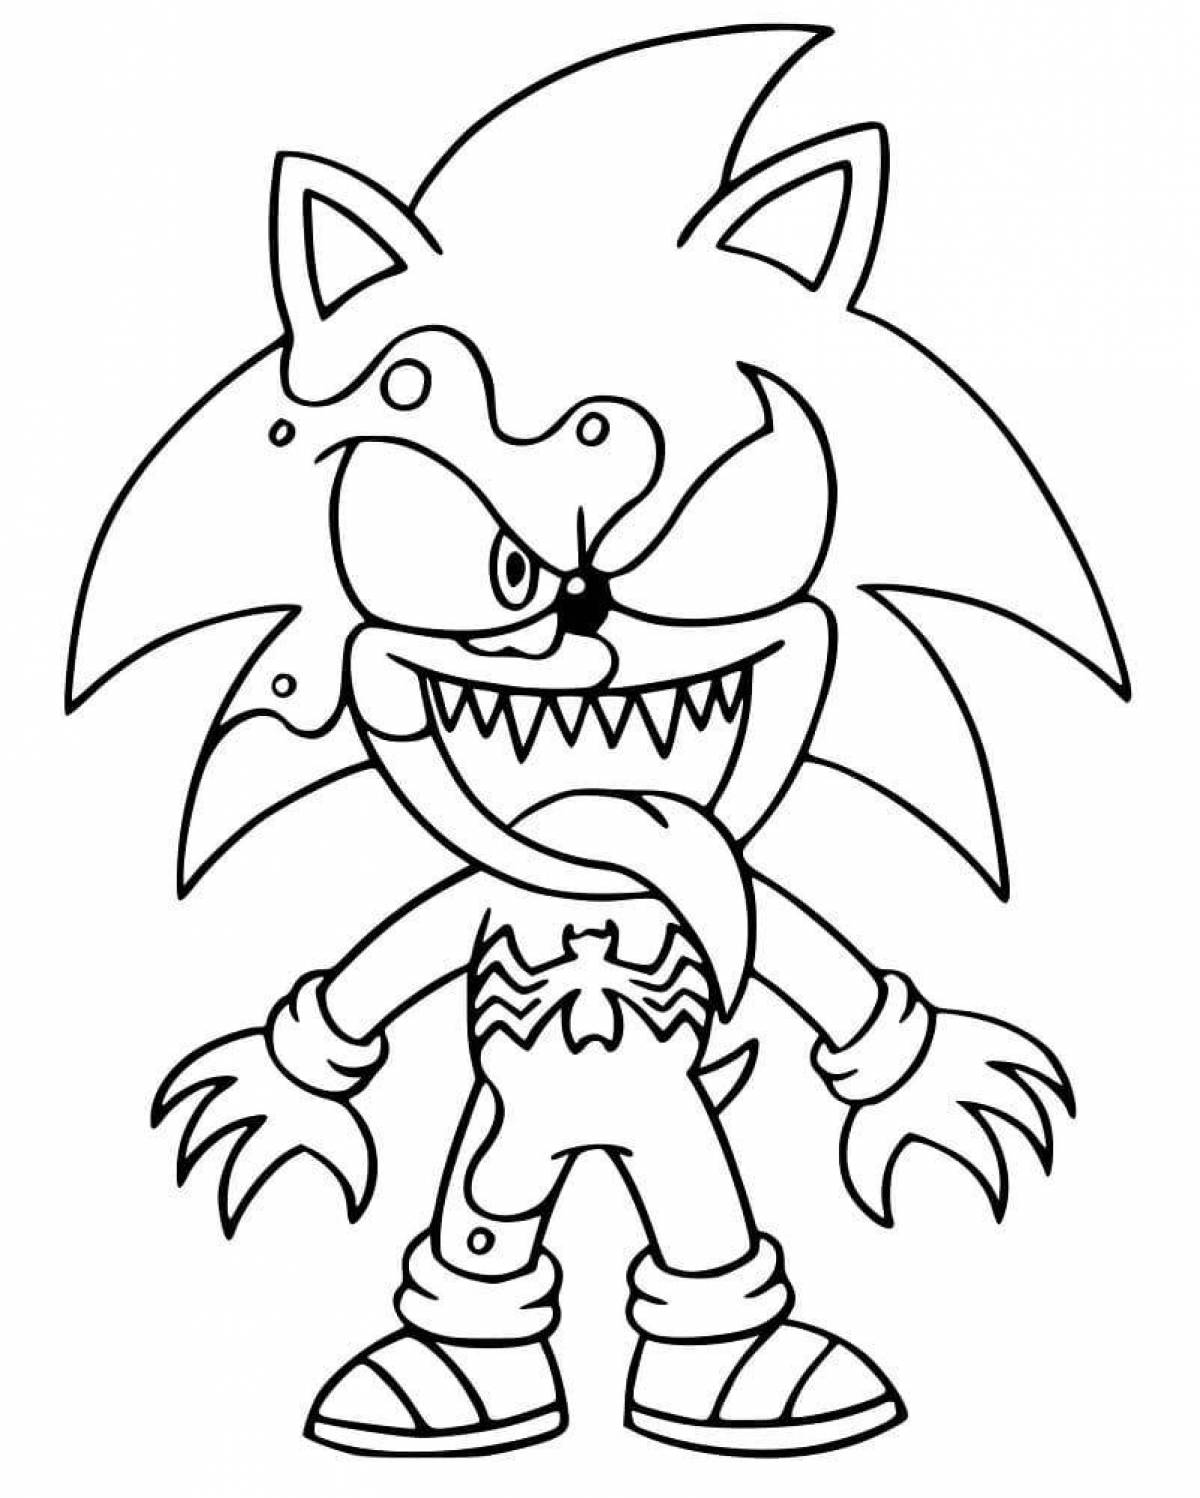 Sonic werewolf tempting coloring book